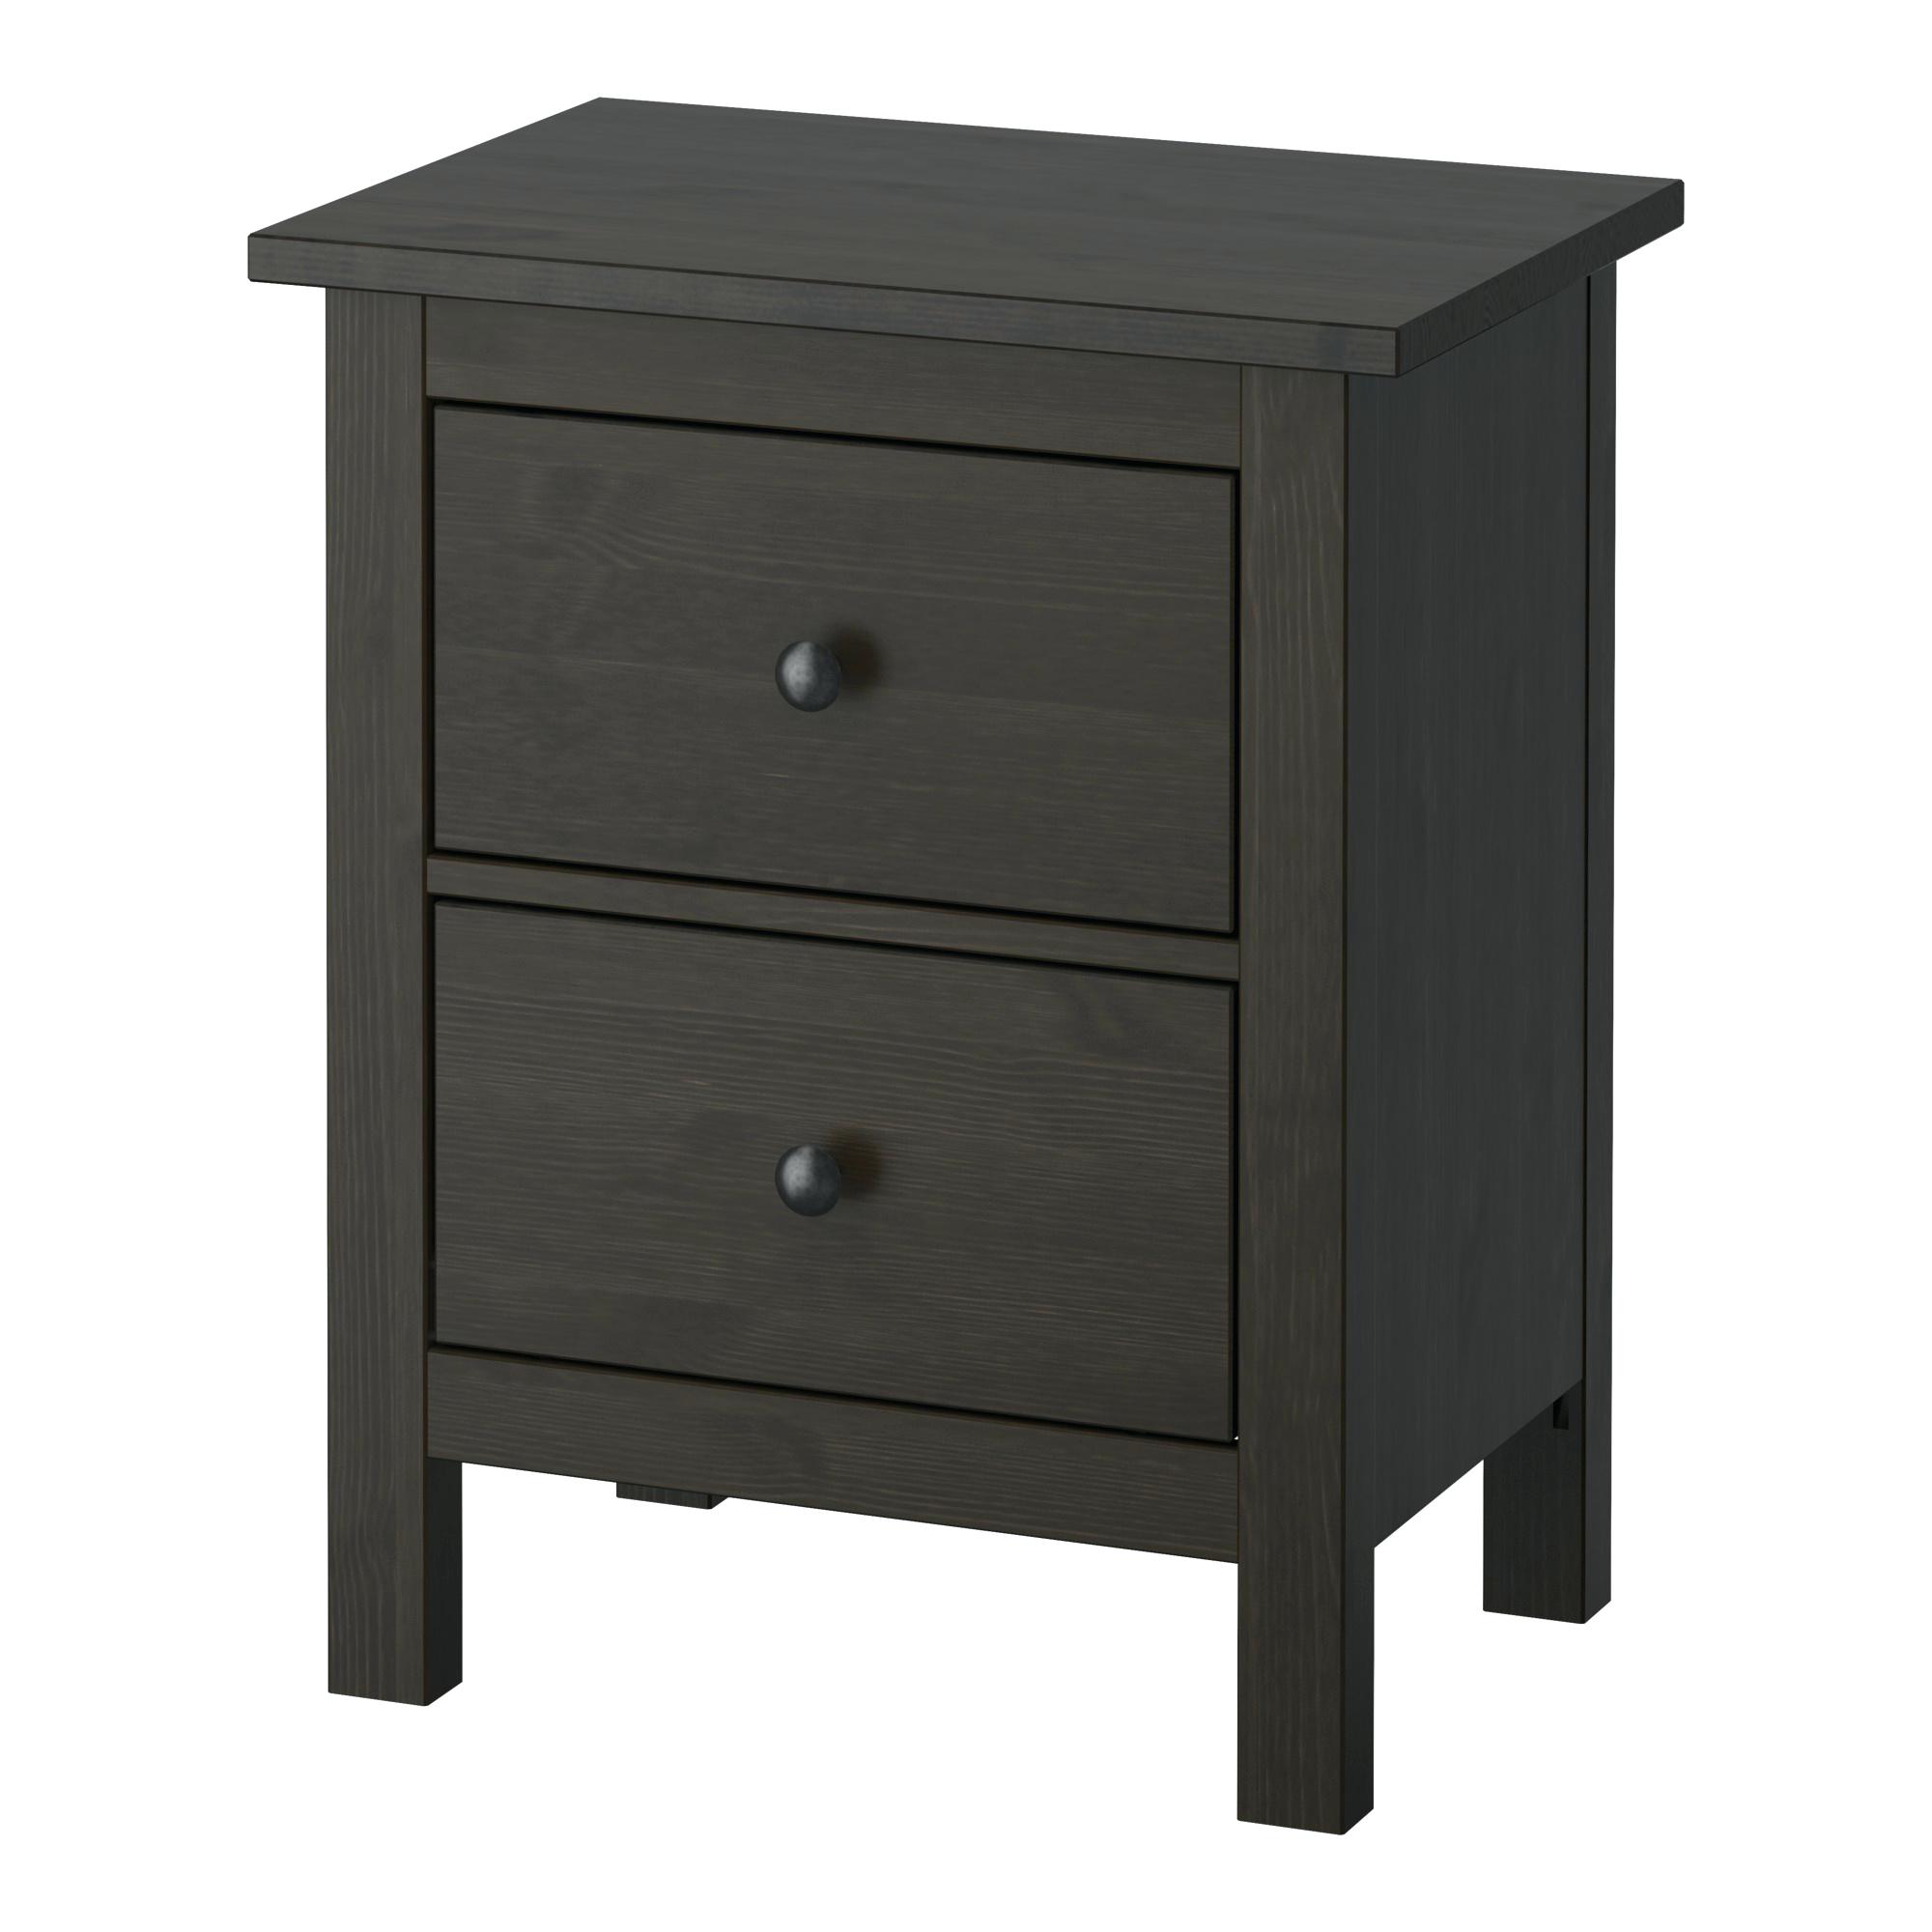 nightstands ikea floating nightstand hack malm rast hemnes blue bedroom sets clearance black metal accent table standard furniture bronze mirrored glass chest drawers white linens